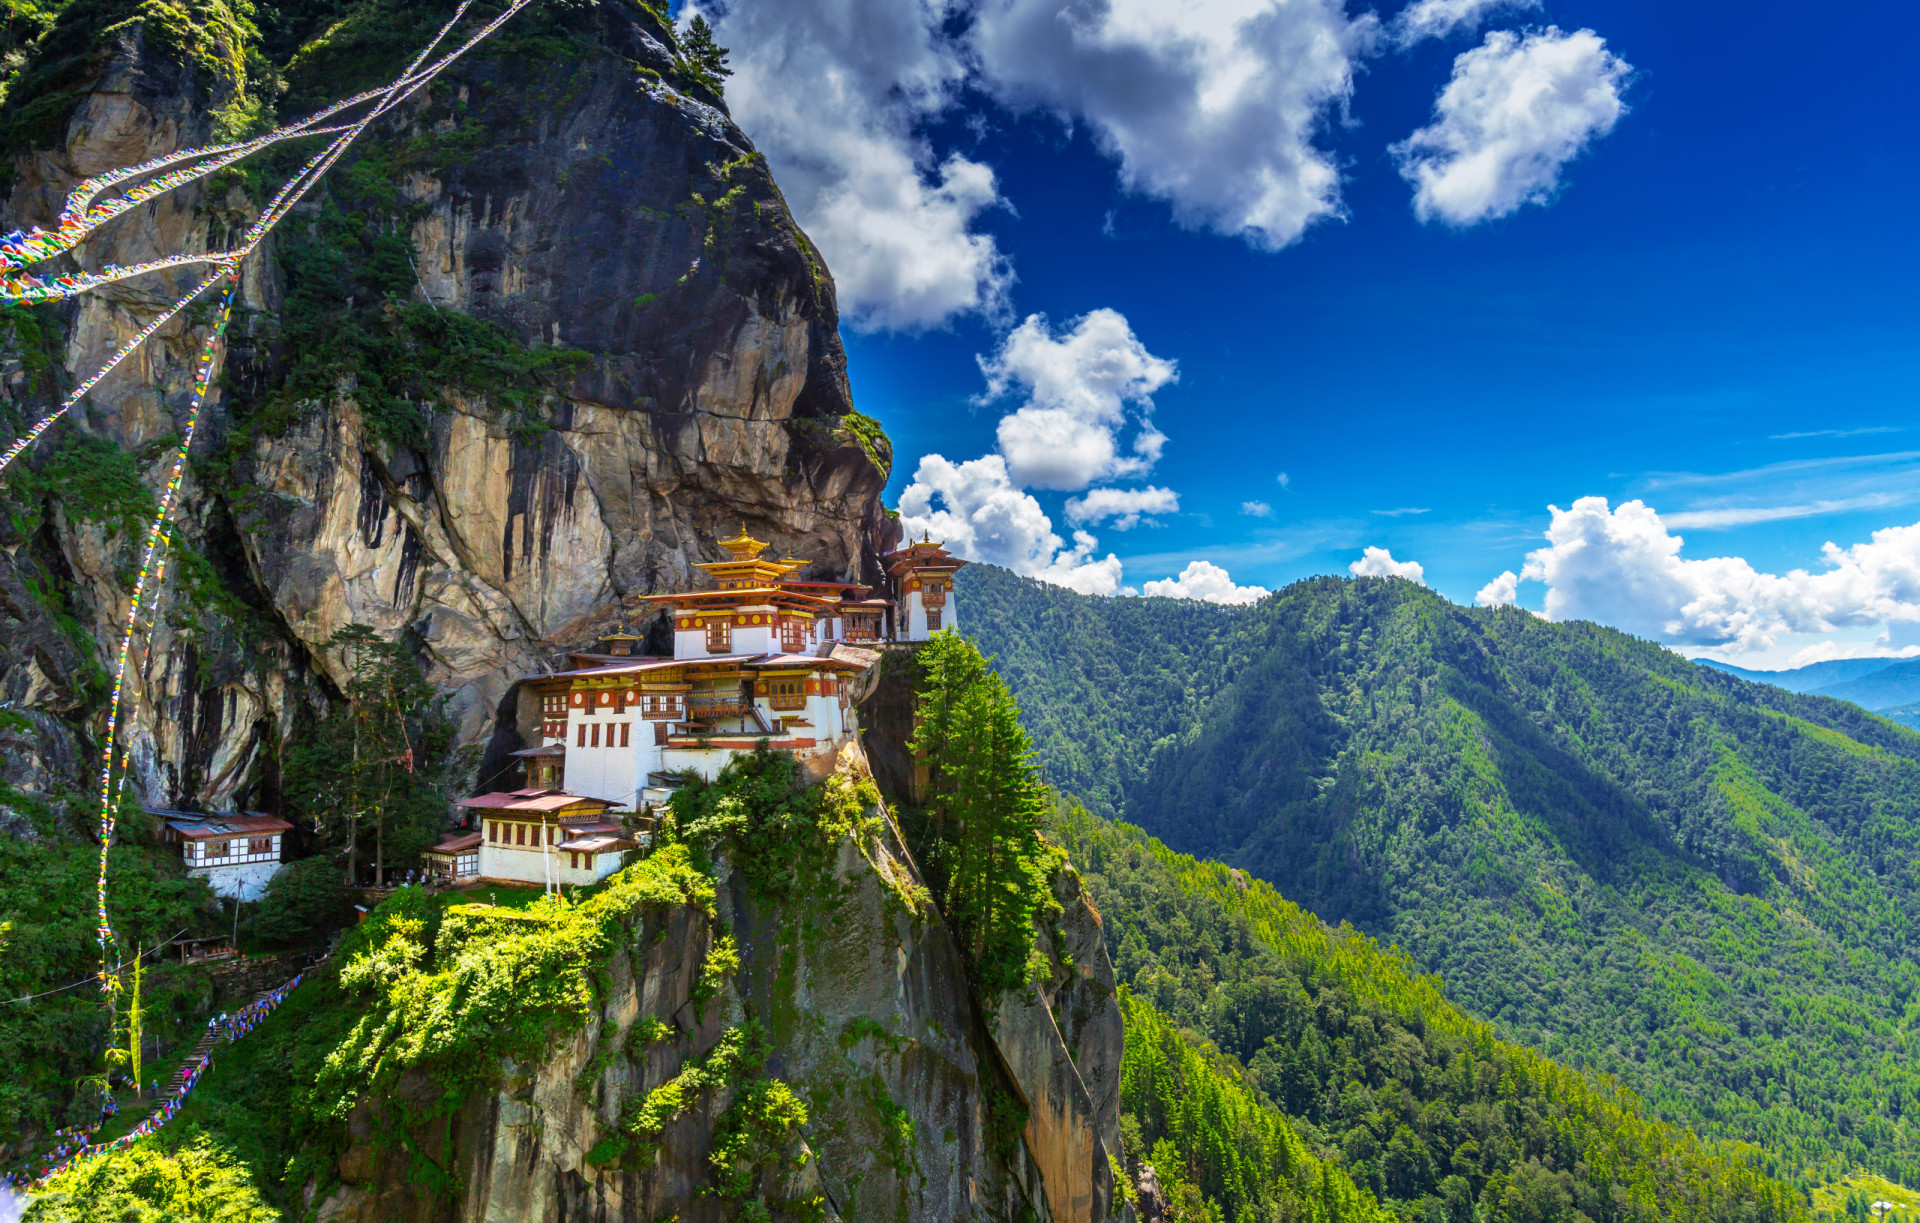 <p>Bhutan has long been known for its steep tourist taxes and charges. The current daily fee for the majority of visitors is US$100.</p><p><a href="https://www.msn.com/en-ph/community/channel/vid-7xx8mnucu55yw63we9va2gwr7uihbxwc68fxqp25x6tg4ftibpra?cvid=94631541bc0f4f89bfd59158d696ad7e">Follow us and access great exclusive content every day</a></p>